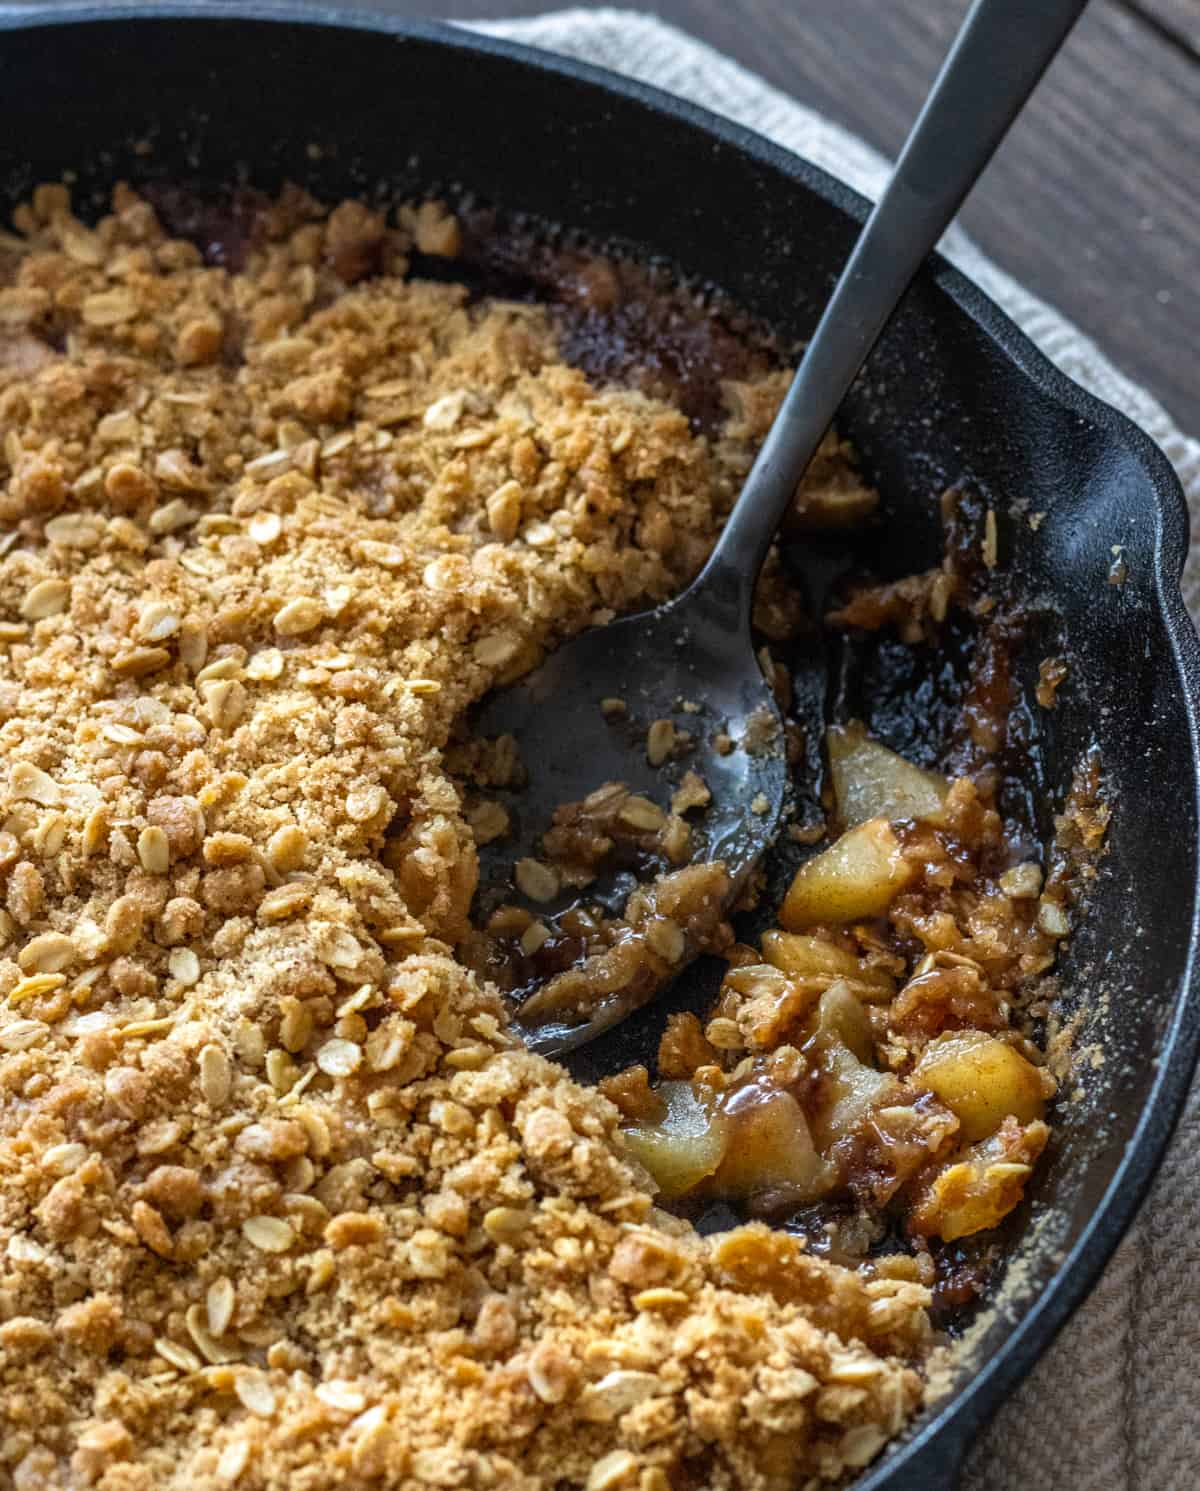 Apple crisp in a cast iron skillet with a large black spoon.